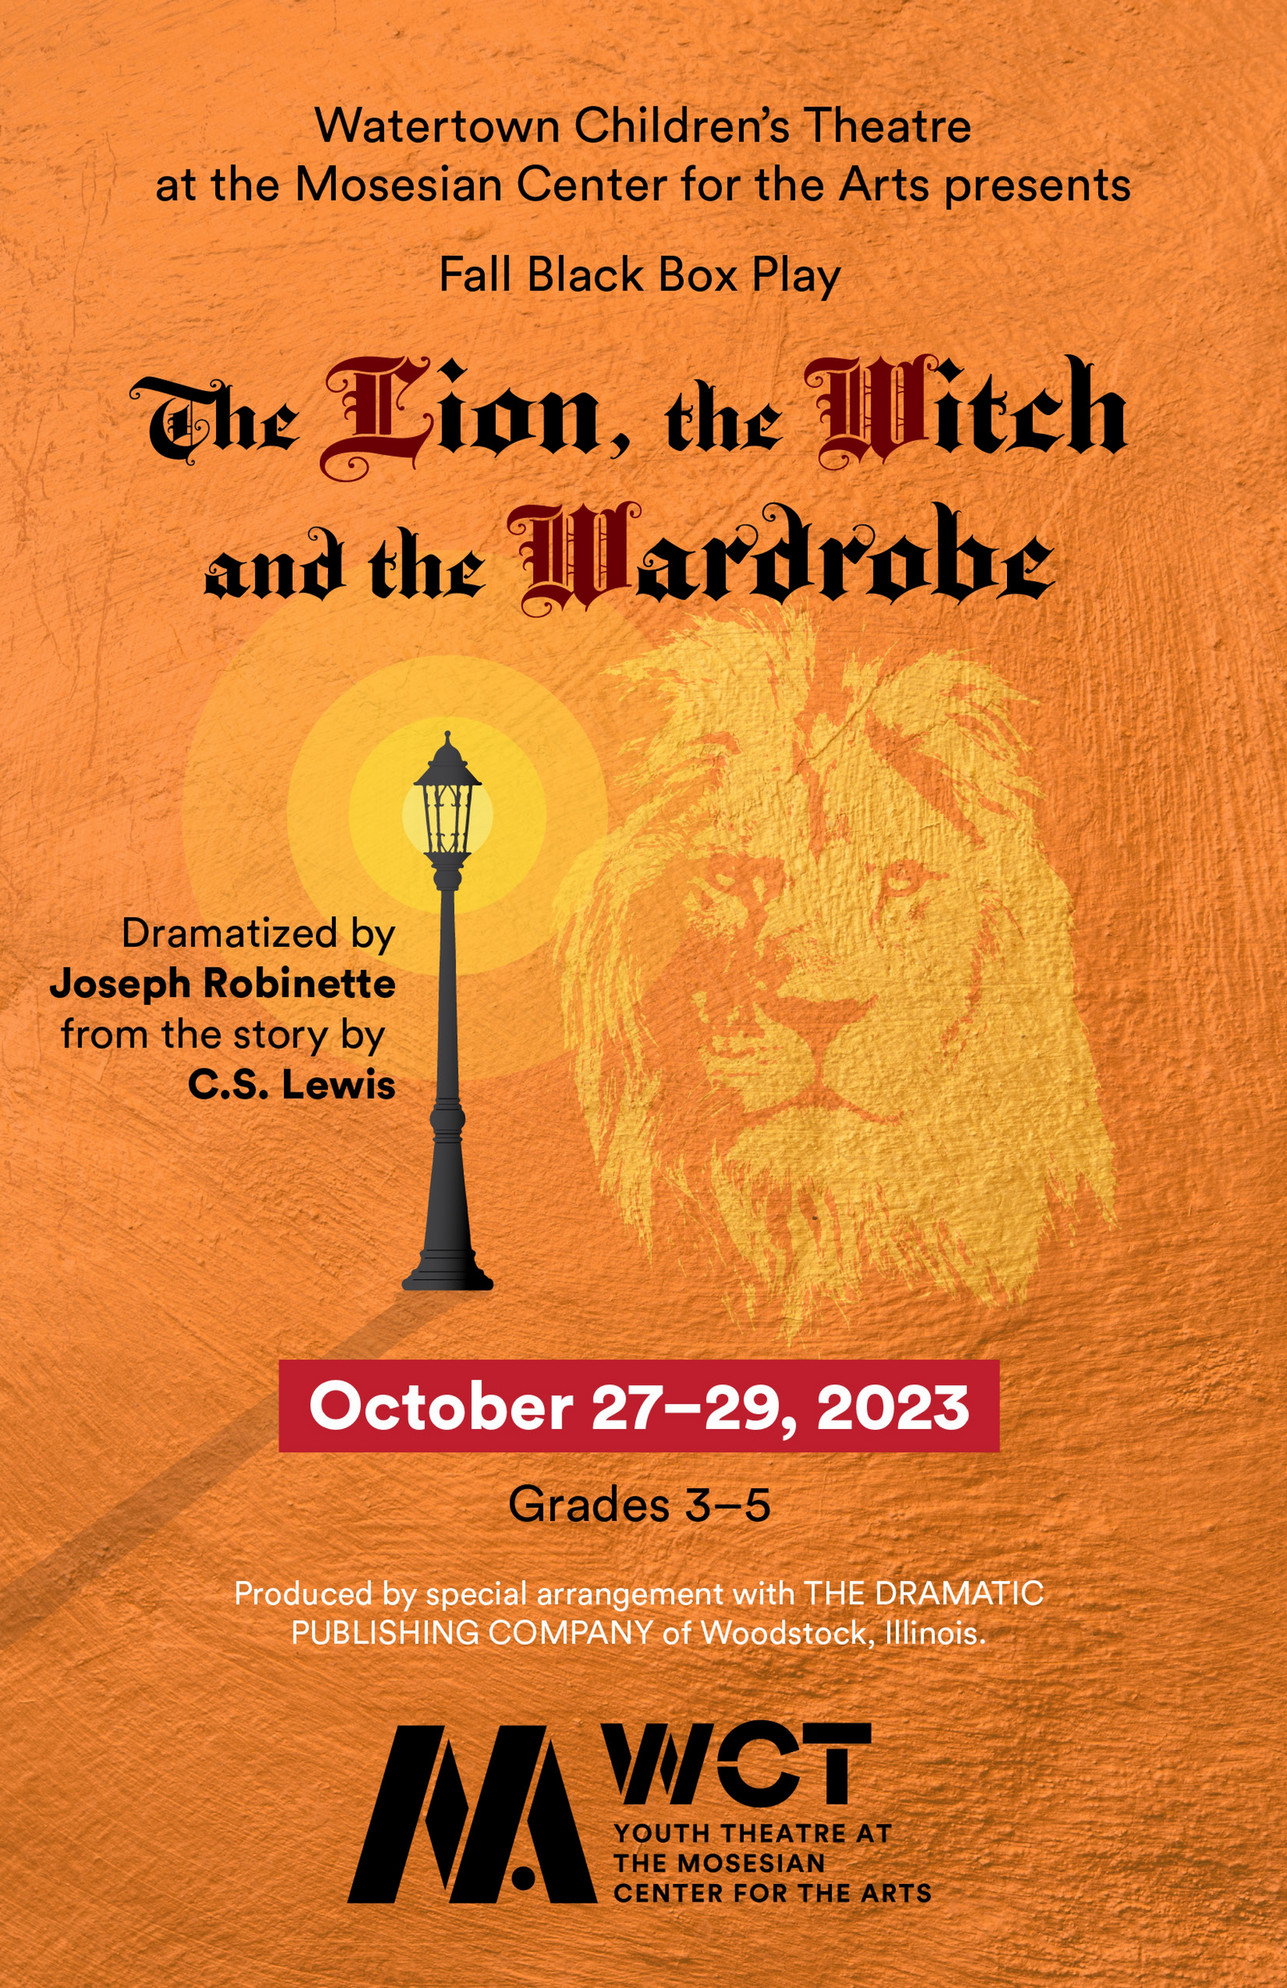 Mosesian Center for the Arts - WCT The Lion, the Witch and the Wardrobe ...